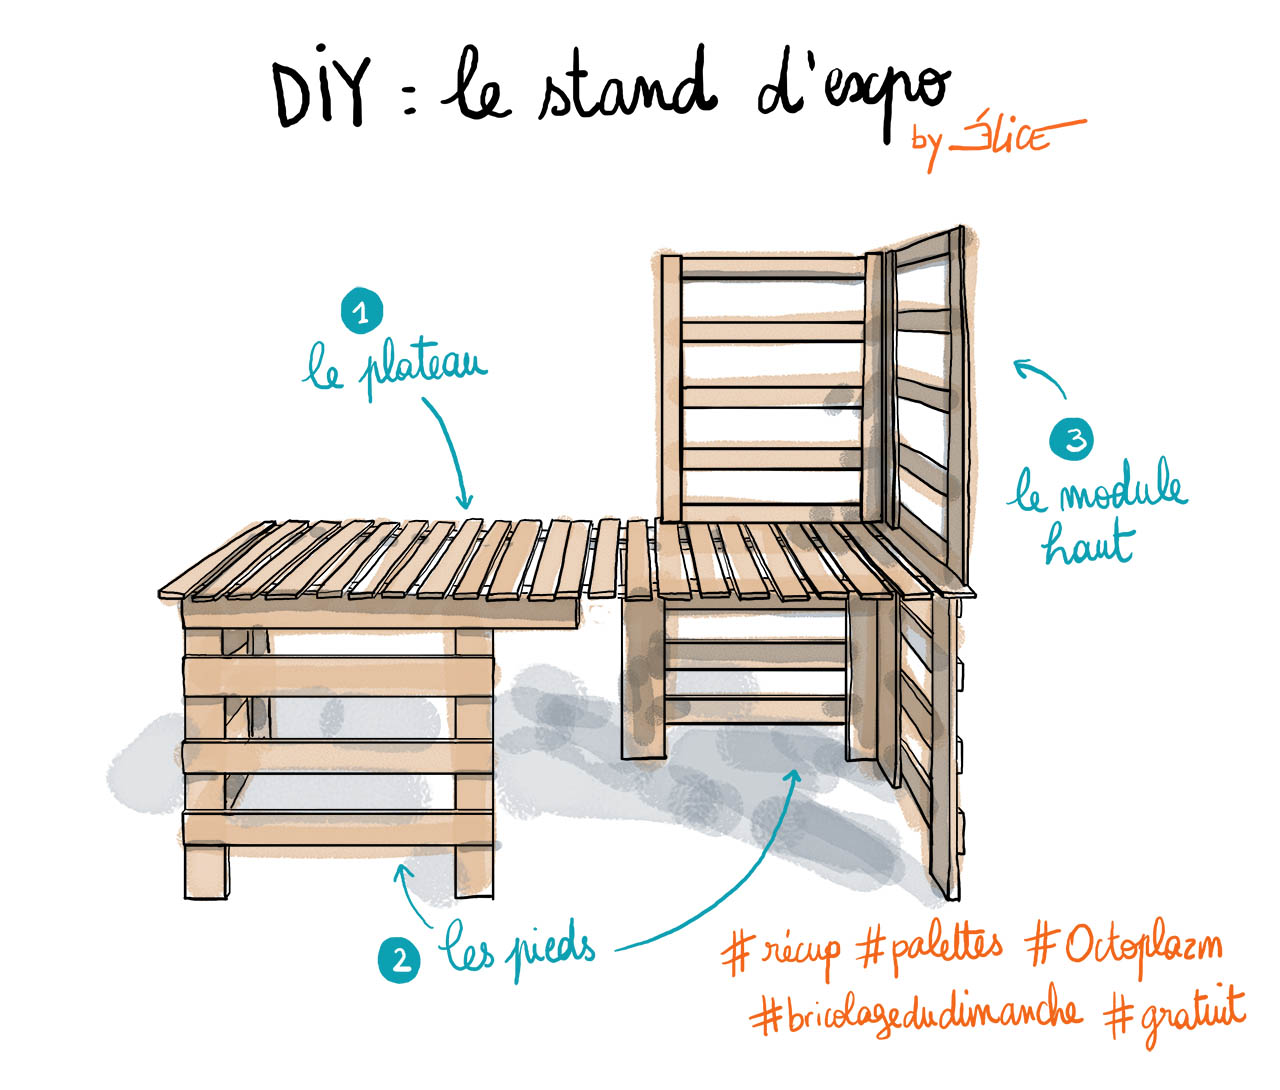 DIY stand d'expo en palette : step by step – Élice